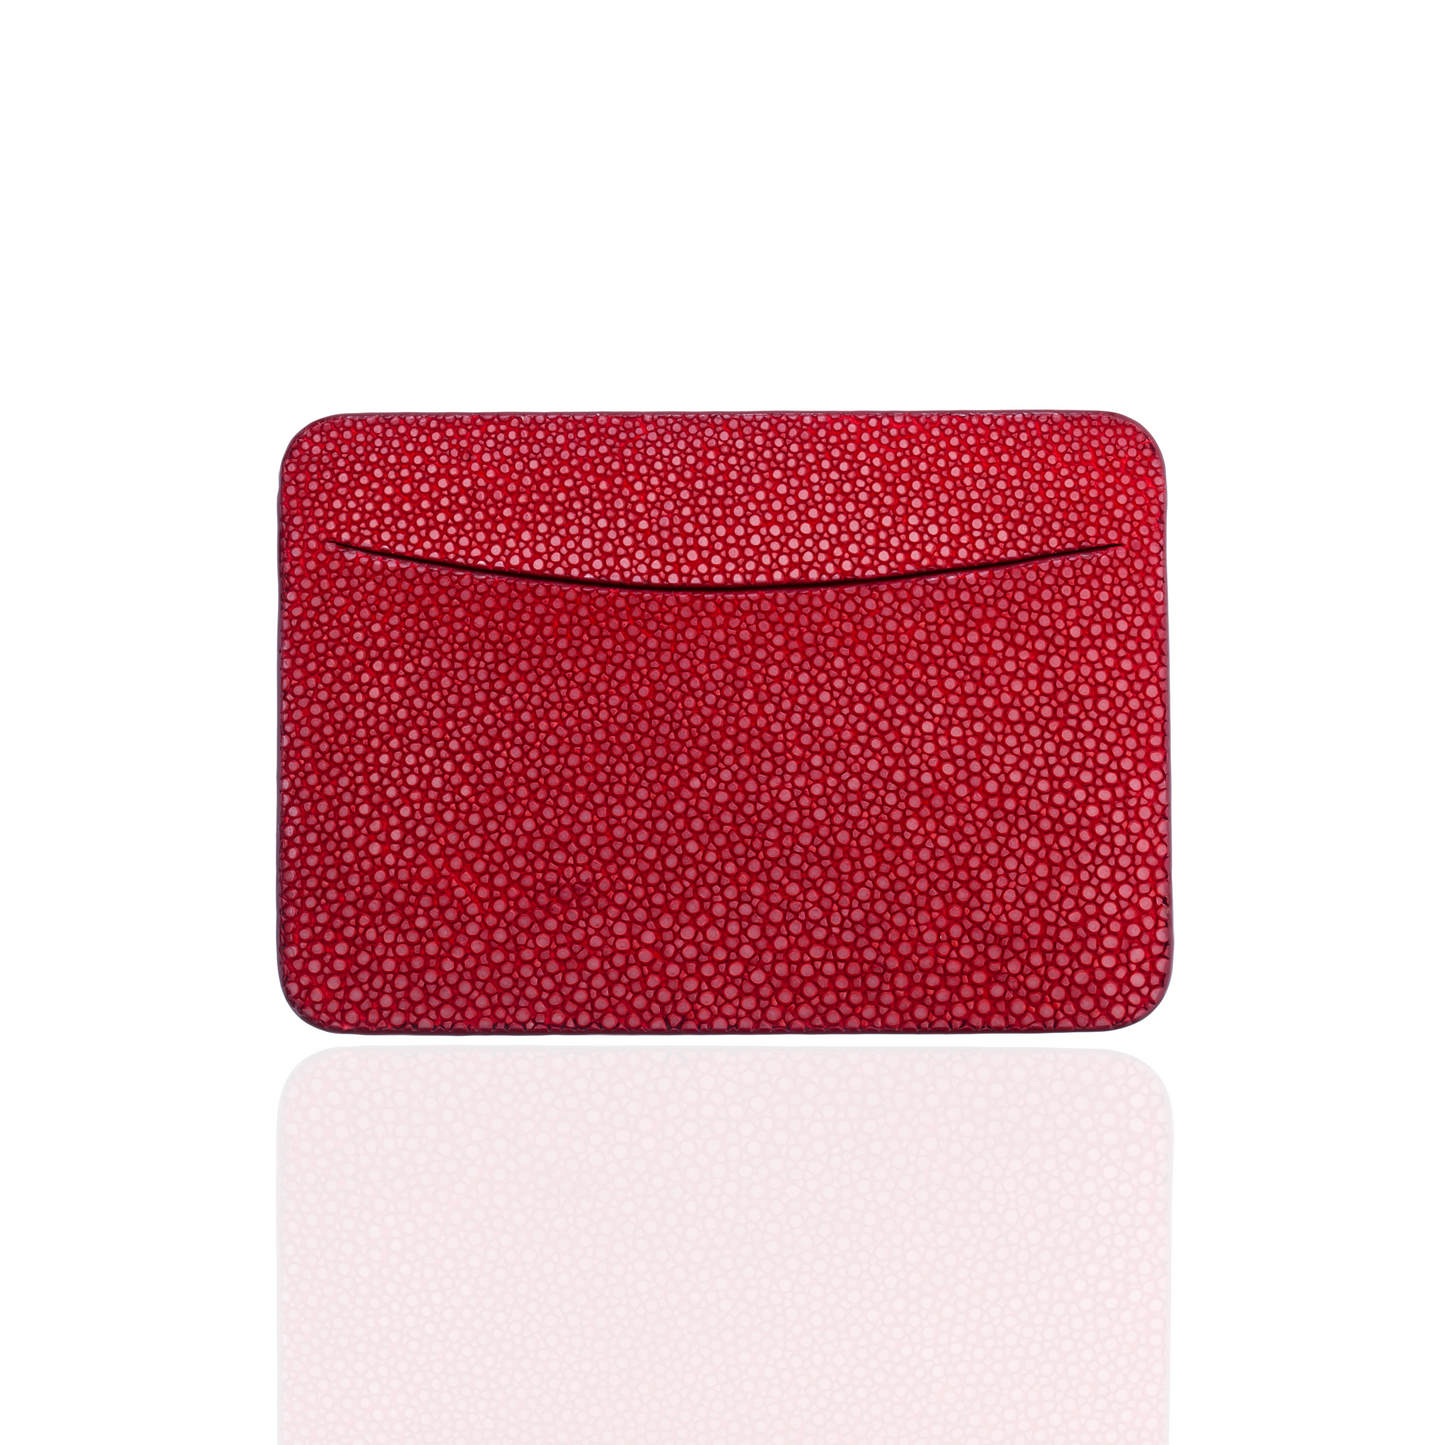 Credit Card Pouch in Red Stingray Leather